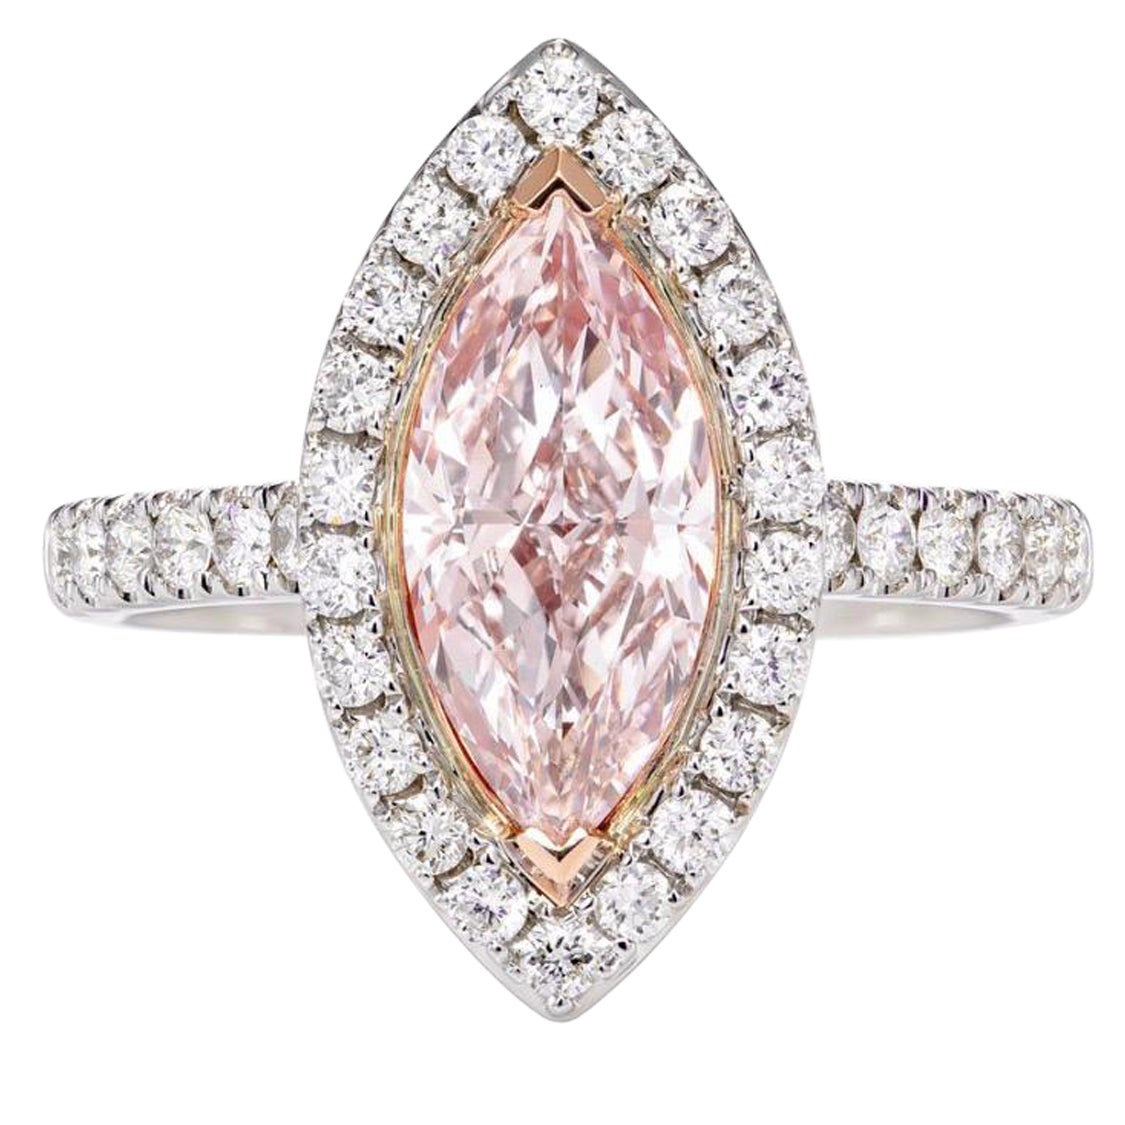 Customised Natural Fancy Pink Diamond Ring in 18K Rose Gold